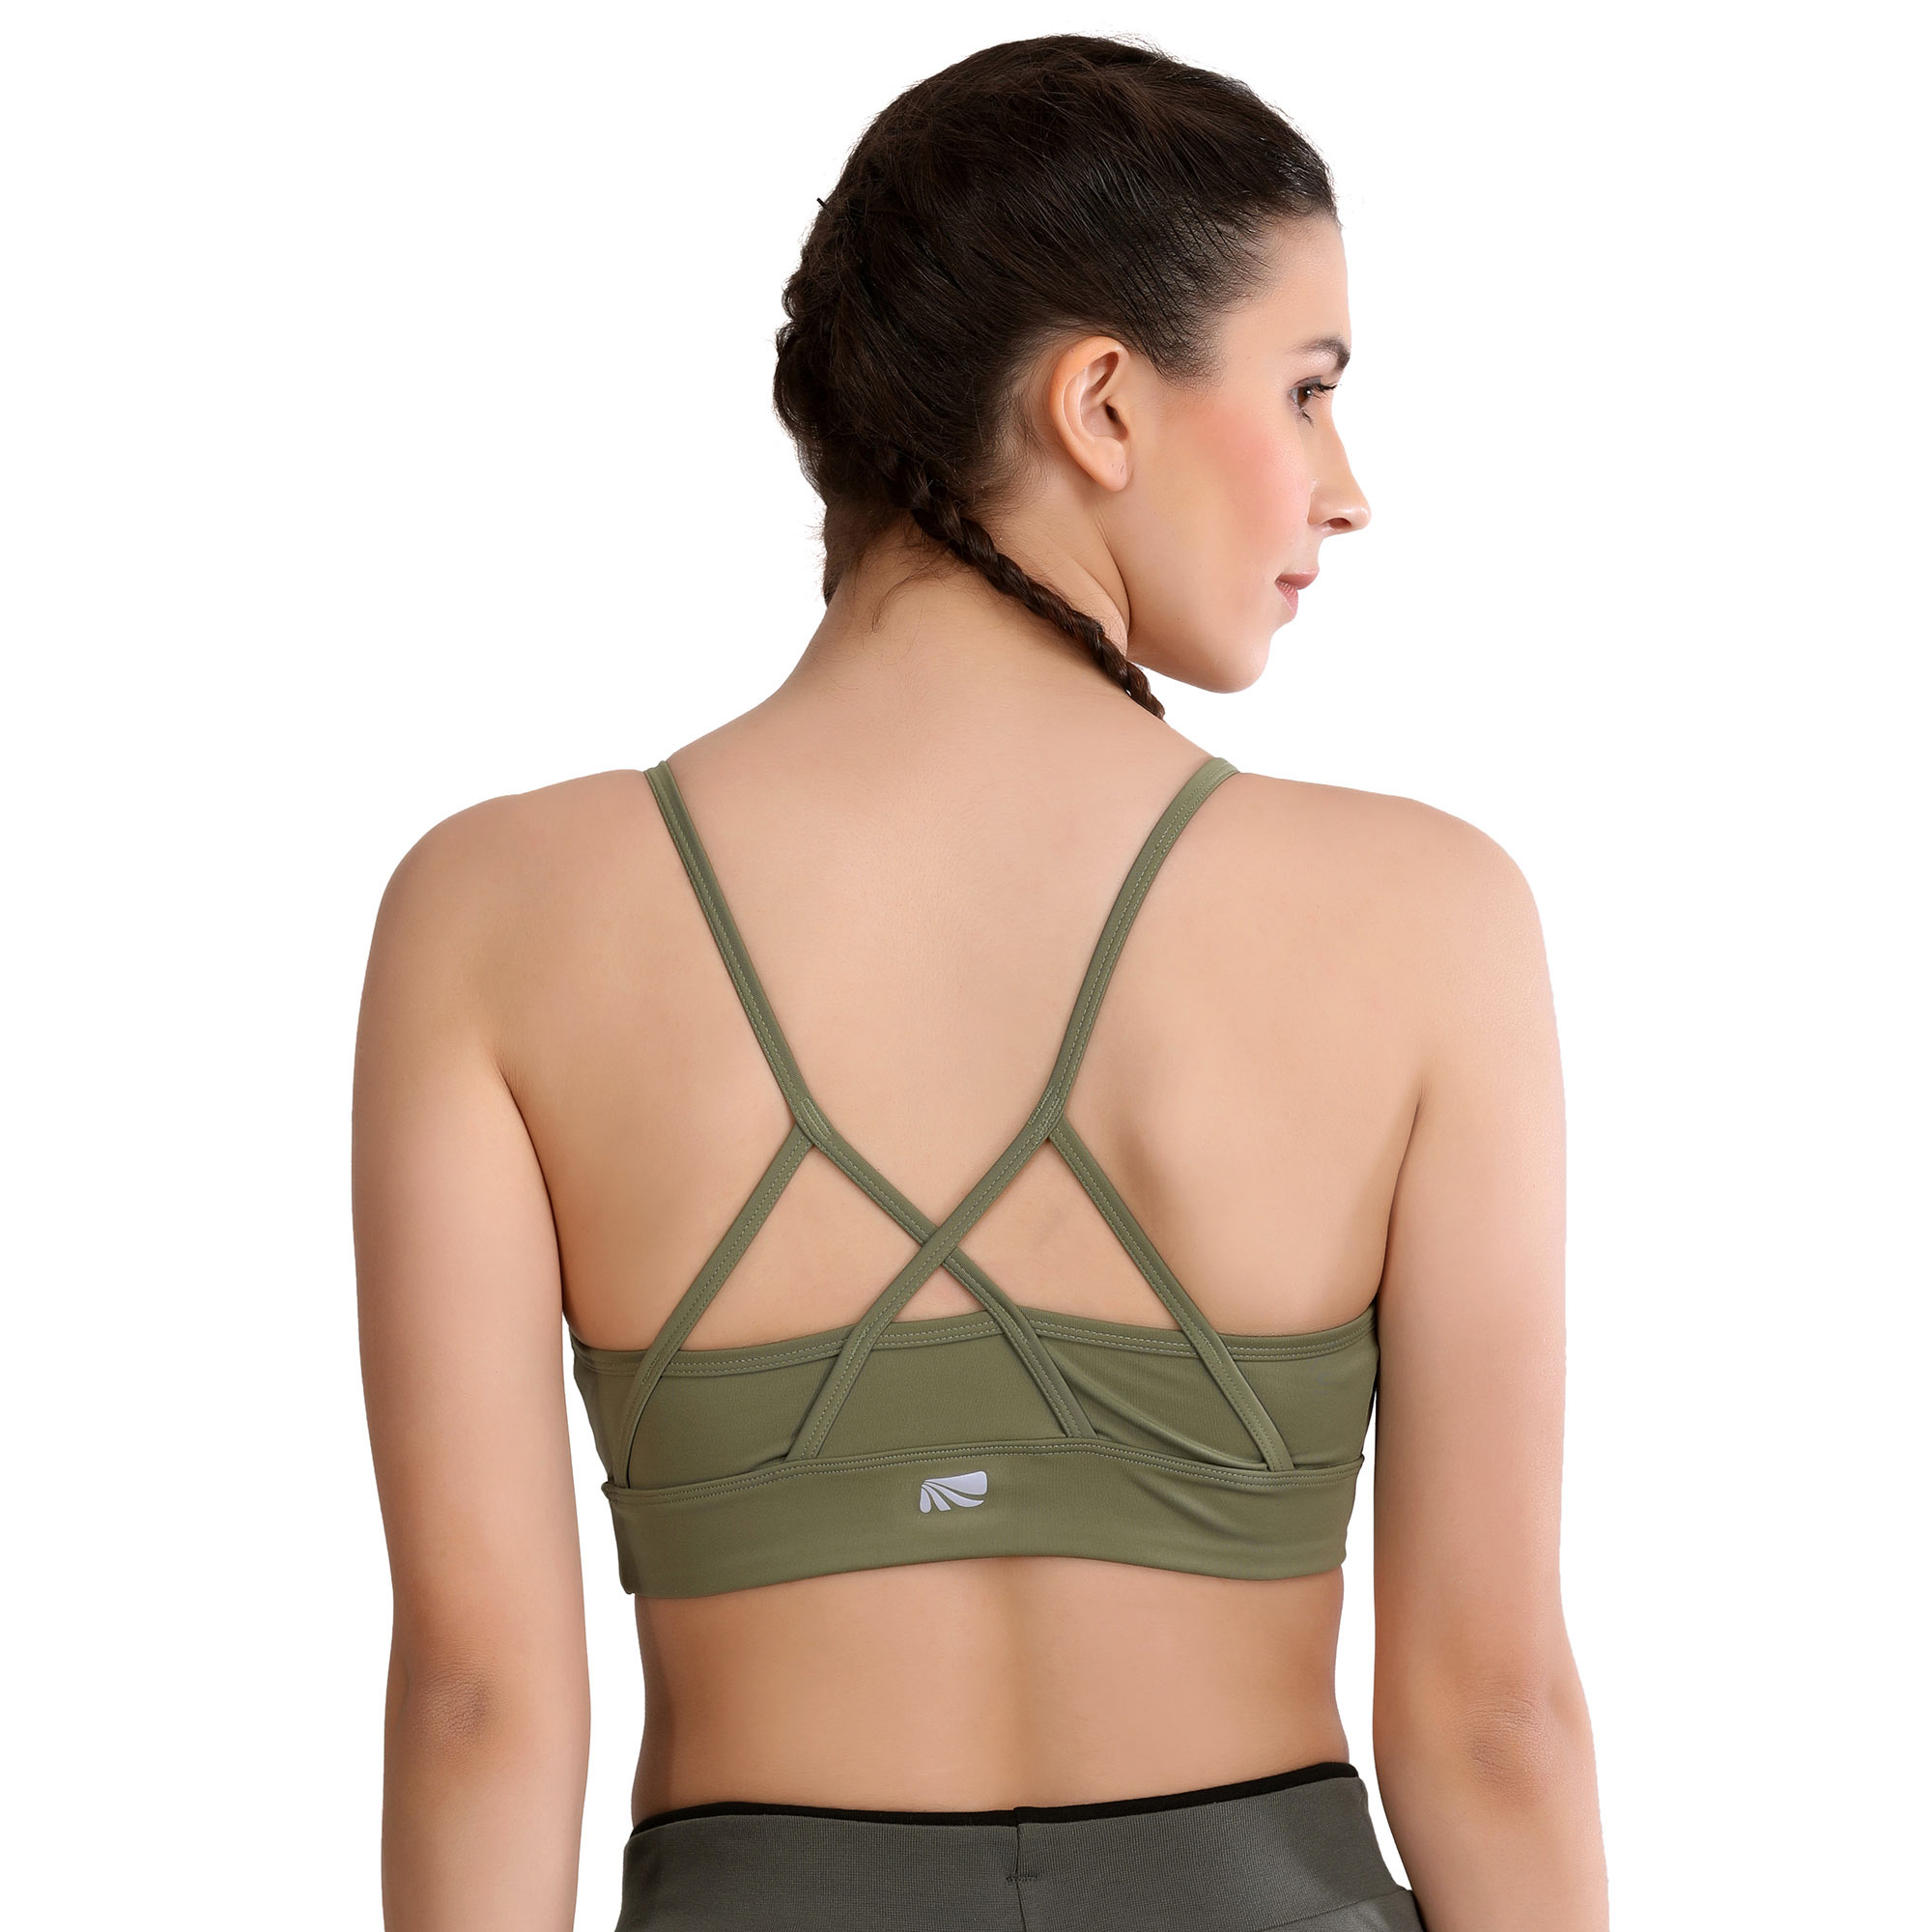 Lovable Energy Bra-High Impact Sports Bra-Olive Green 16852965 in Ahmedabad  at best price by Patel Lingerie - Justdial